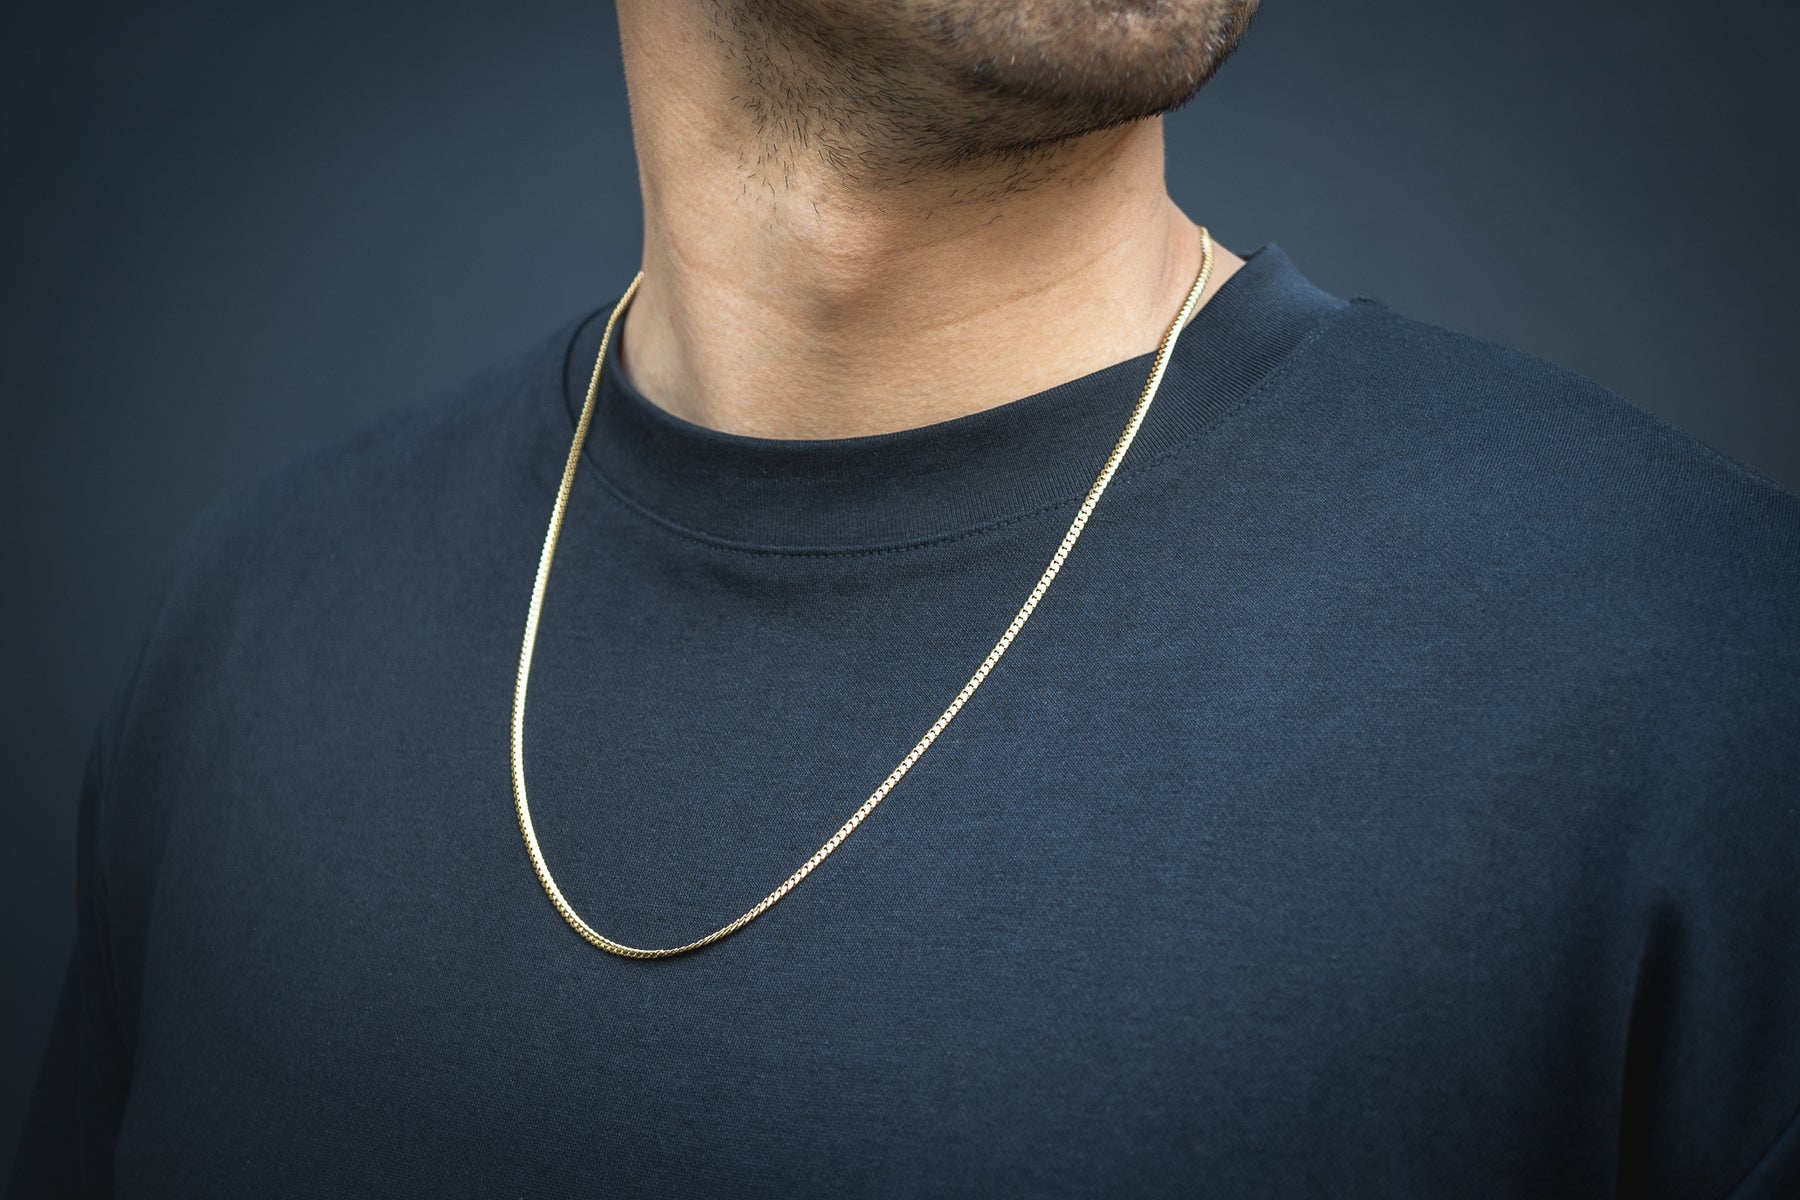 Buy Via Mazzini Gold Plated No-Tarnish No-Fading Stainless Steel 2.5mm  Thickness Hip-Hop Chain Necklace For Men And Women (NK1057) 1Pc at Amazon.in